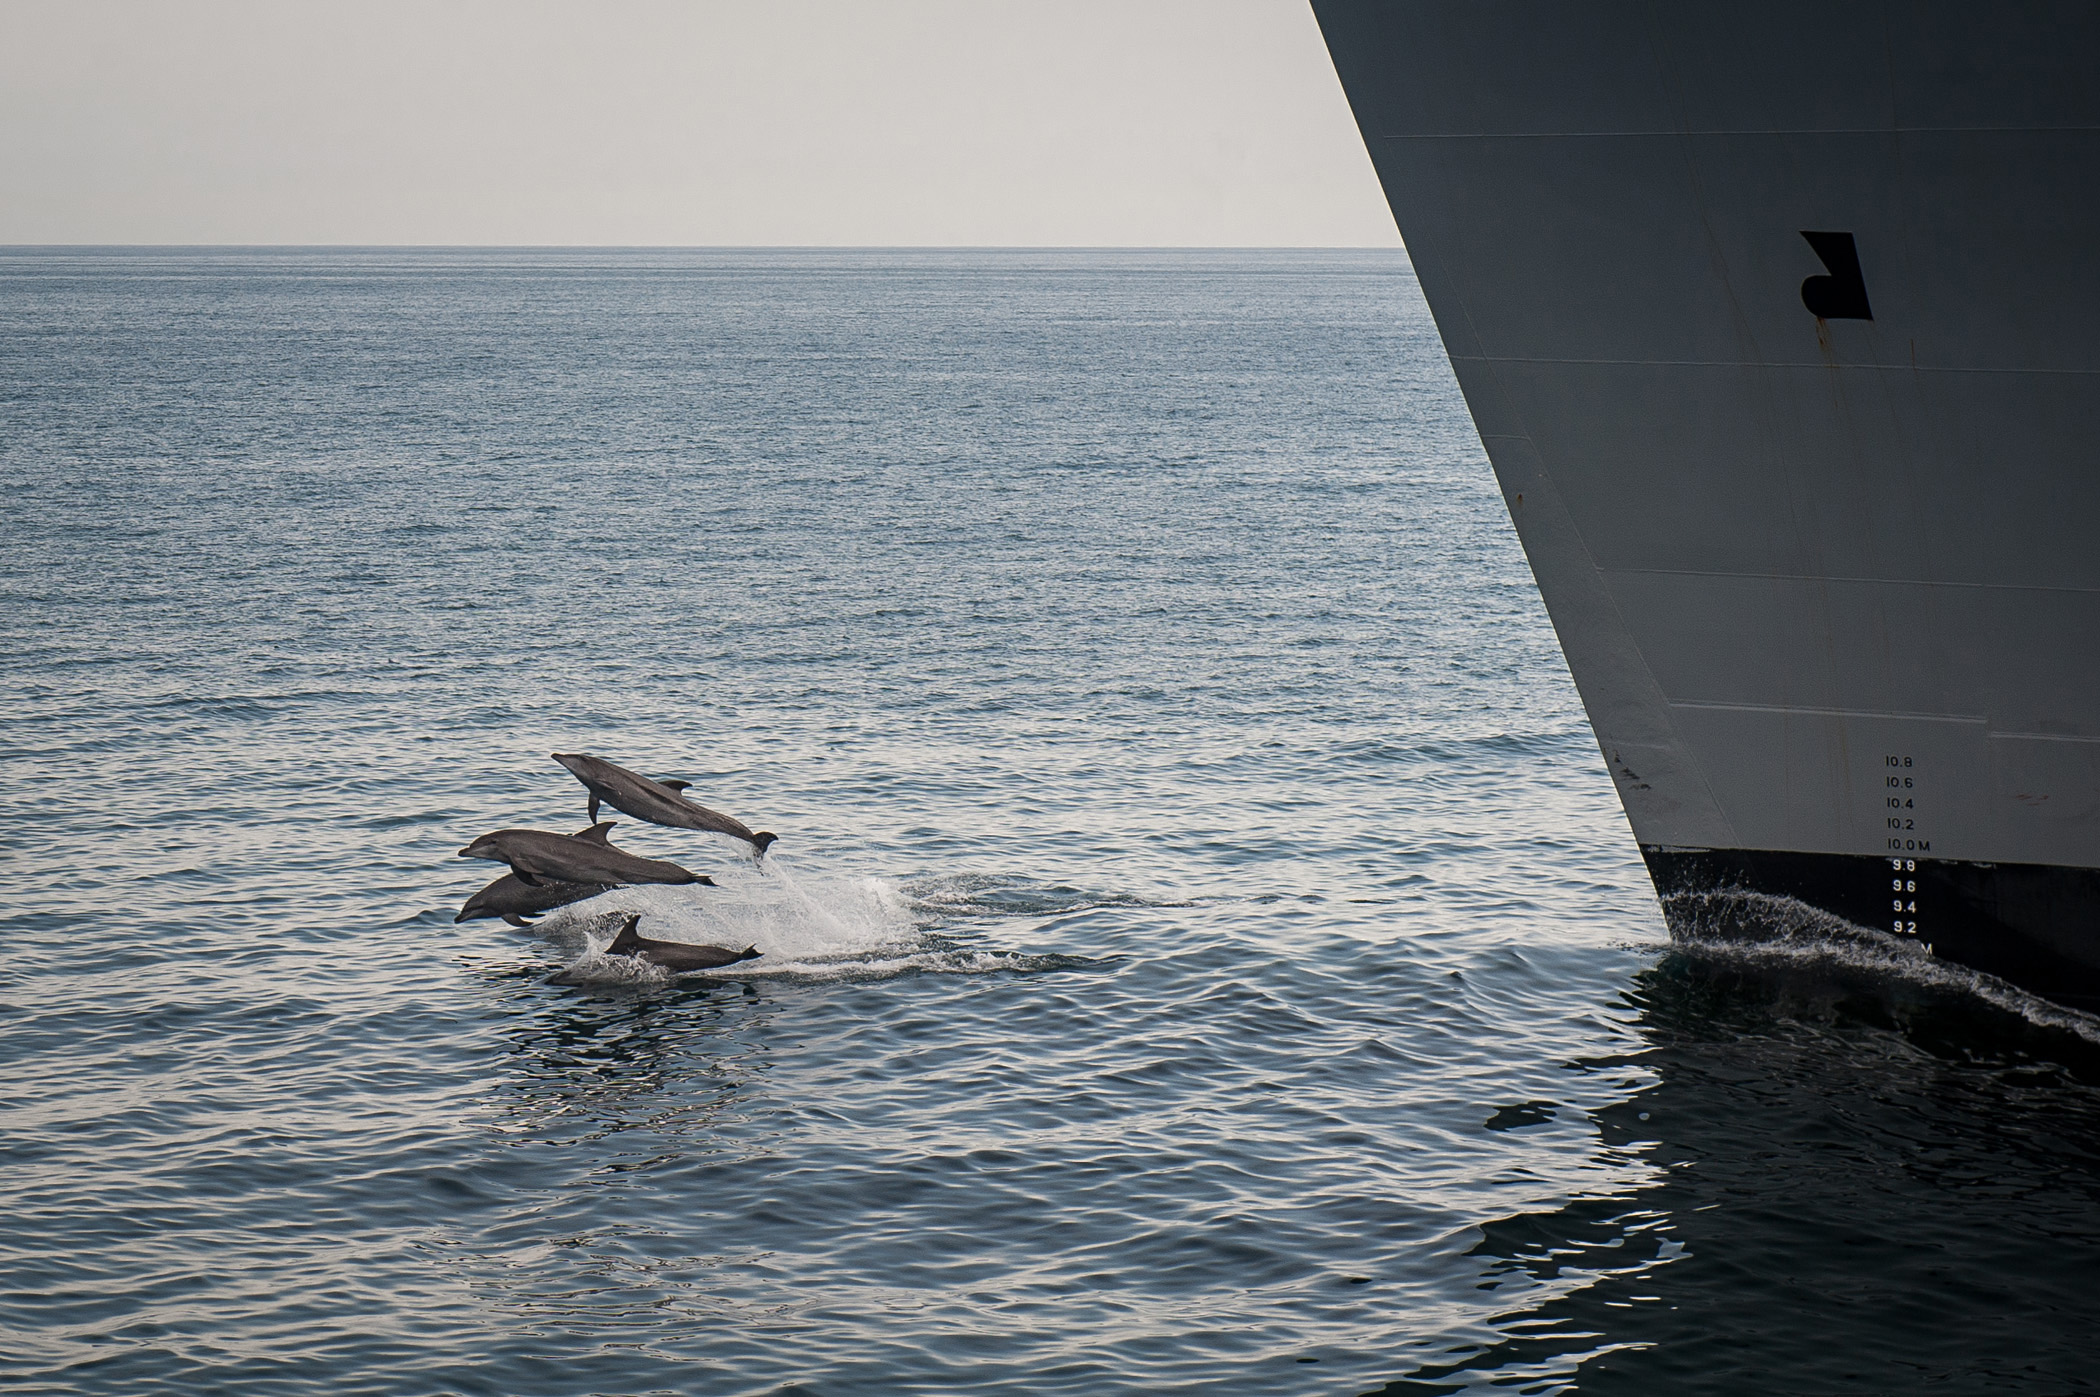 U.S. 5th FLEET AREA OF RESPONSIBILITY (March 24, 2013) Dolphins jump out of the water near the Military Sealift Command dry cargo and ammunition ship USNS Alan Shepard (T-AKE-3) during an underway replenishment with the guided-missile destroyer USS Stockdale (DDG 106), not pictured. (U.S. Navy photo by Mass Communication Specialist 2nd Class David Hooper/Released) 130324-N-HN991-338 Join the conversation http://www.facebook.com/USNavy http://www.twitter.com/USNavy http://navylive.dodlive.mil